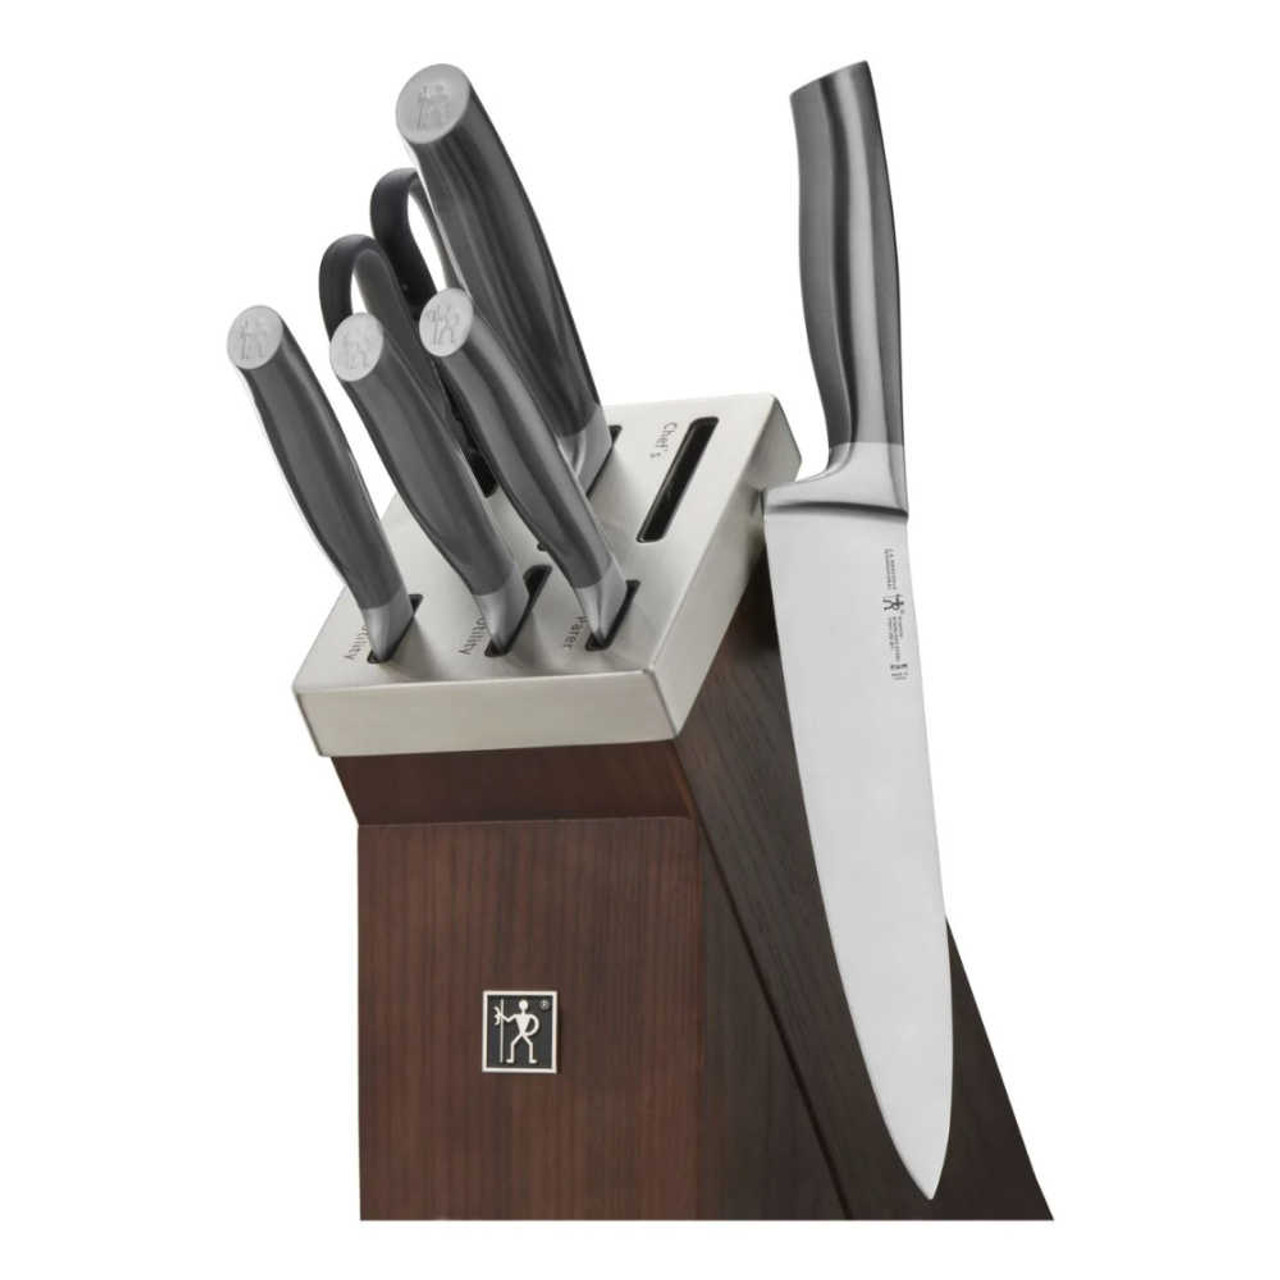 https://cdn11.bigcommerce.com/s-hccytny0od/images/stencil/1280x1280/products/5182/22382/Henckels_Graphite_7-Piece_Self-Sharpening_Knife_Block_Set__38352.1669149193.jpg?c=2?imbypass=on